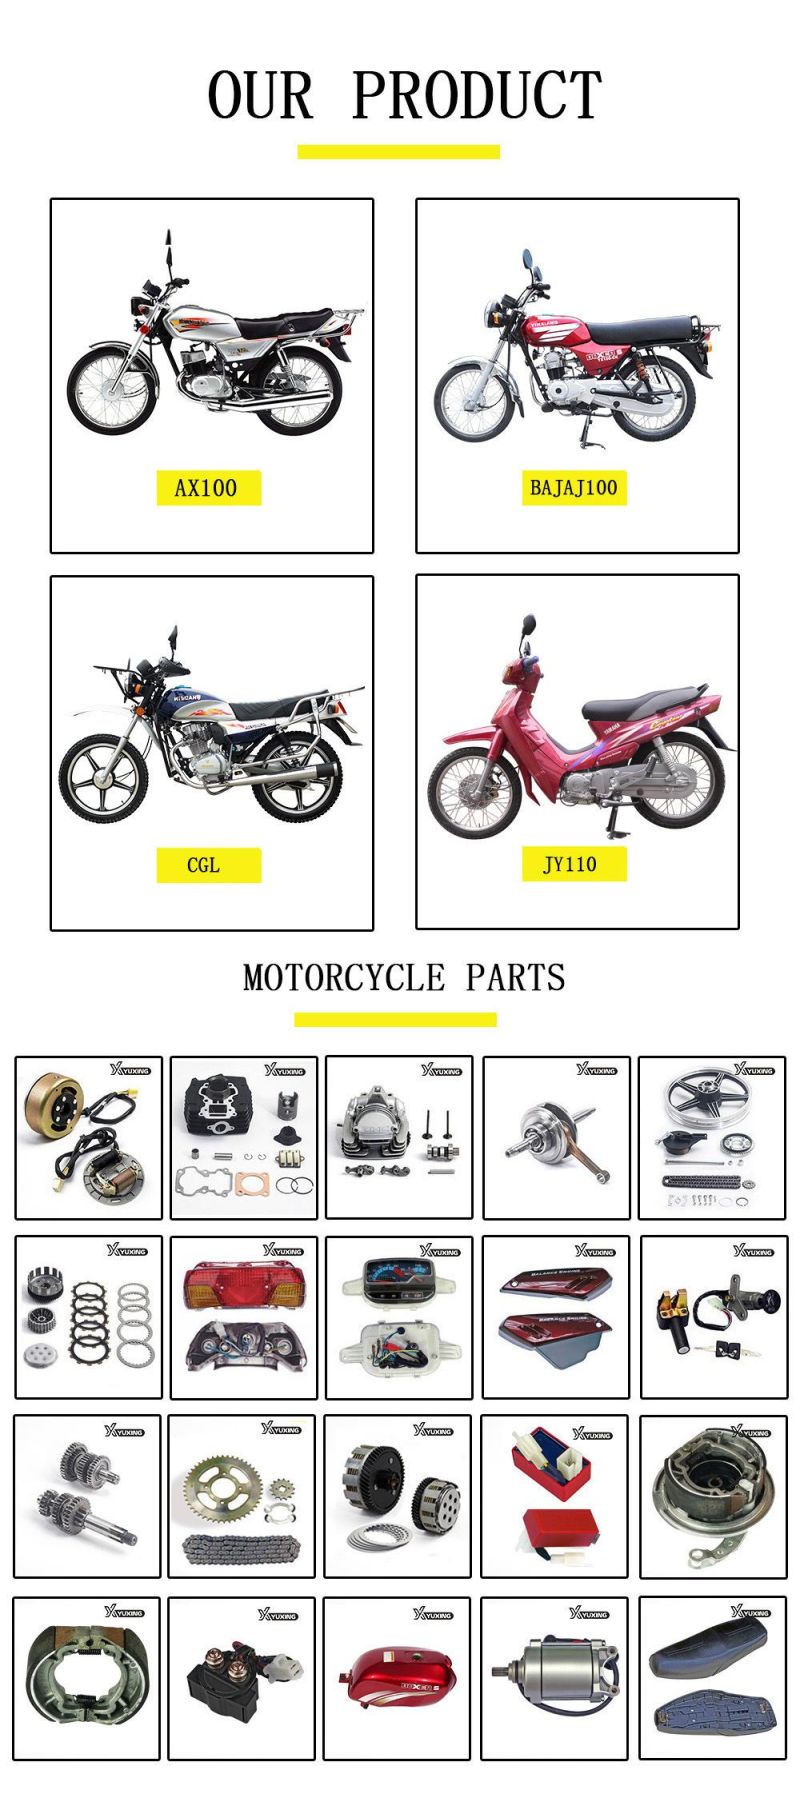 Motorcycle Spare Parts Maintenance-Free 12n6.5-BS 12V6.5ah Motorcycle Battery for Motorbike